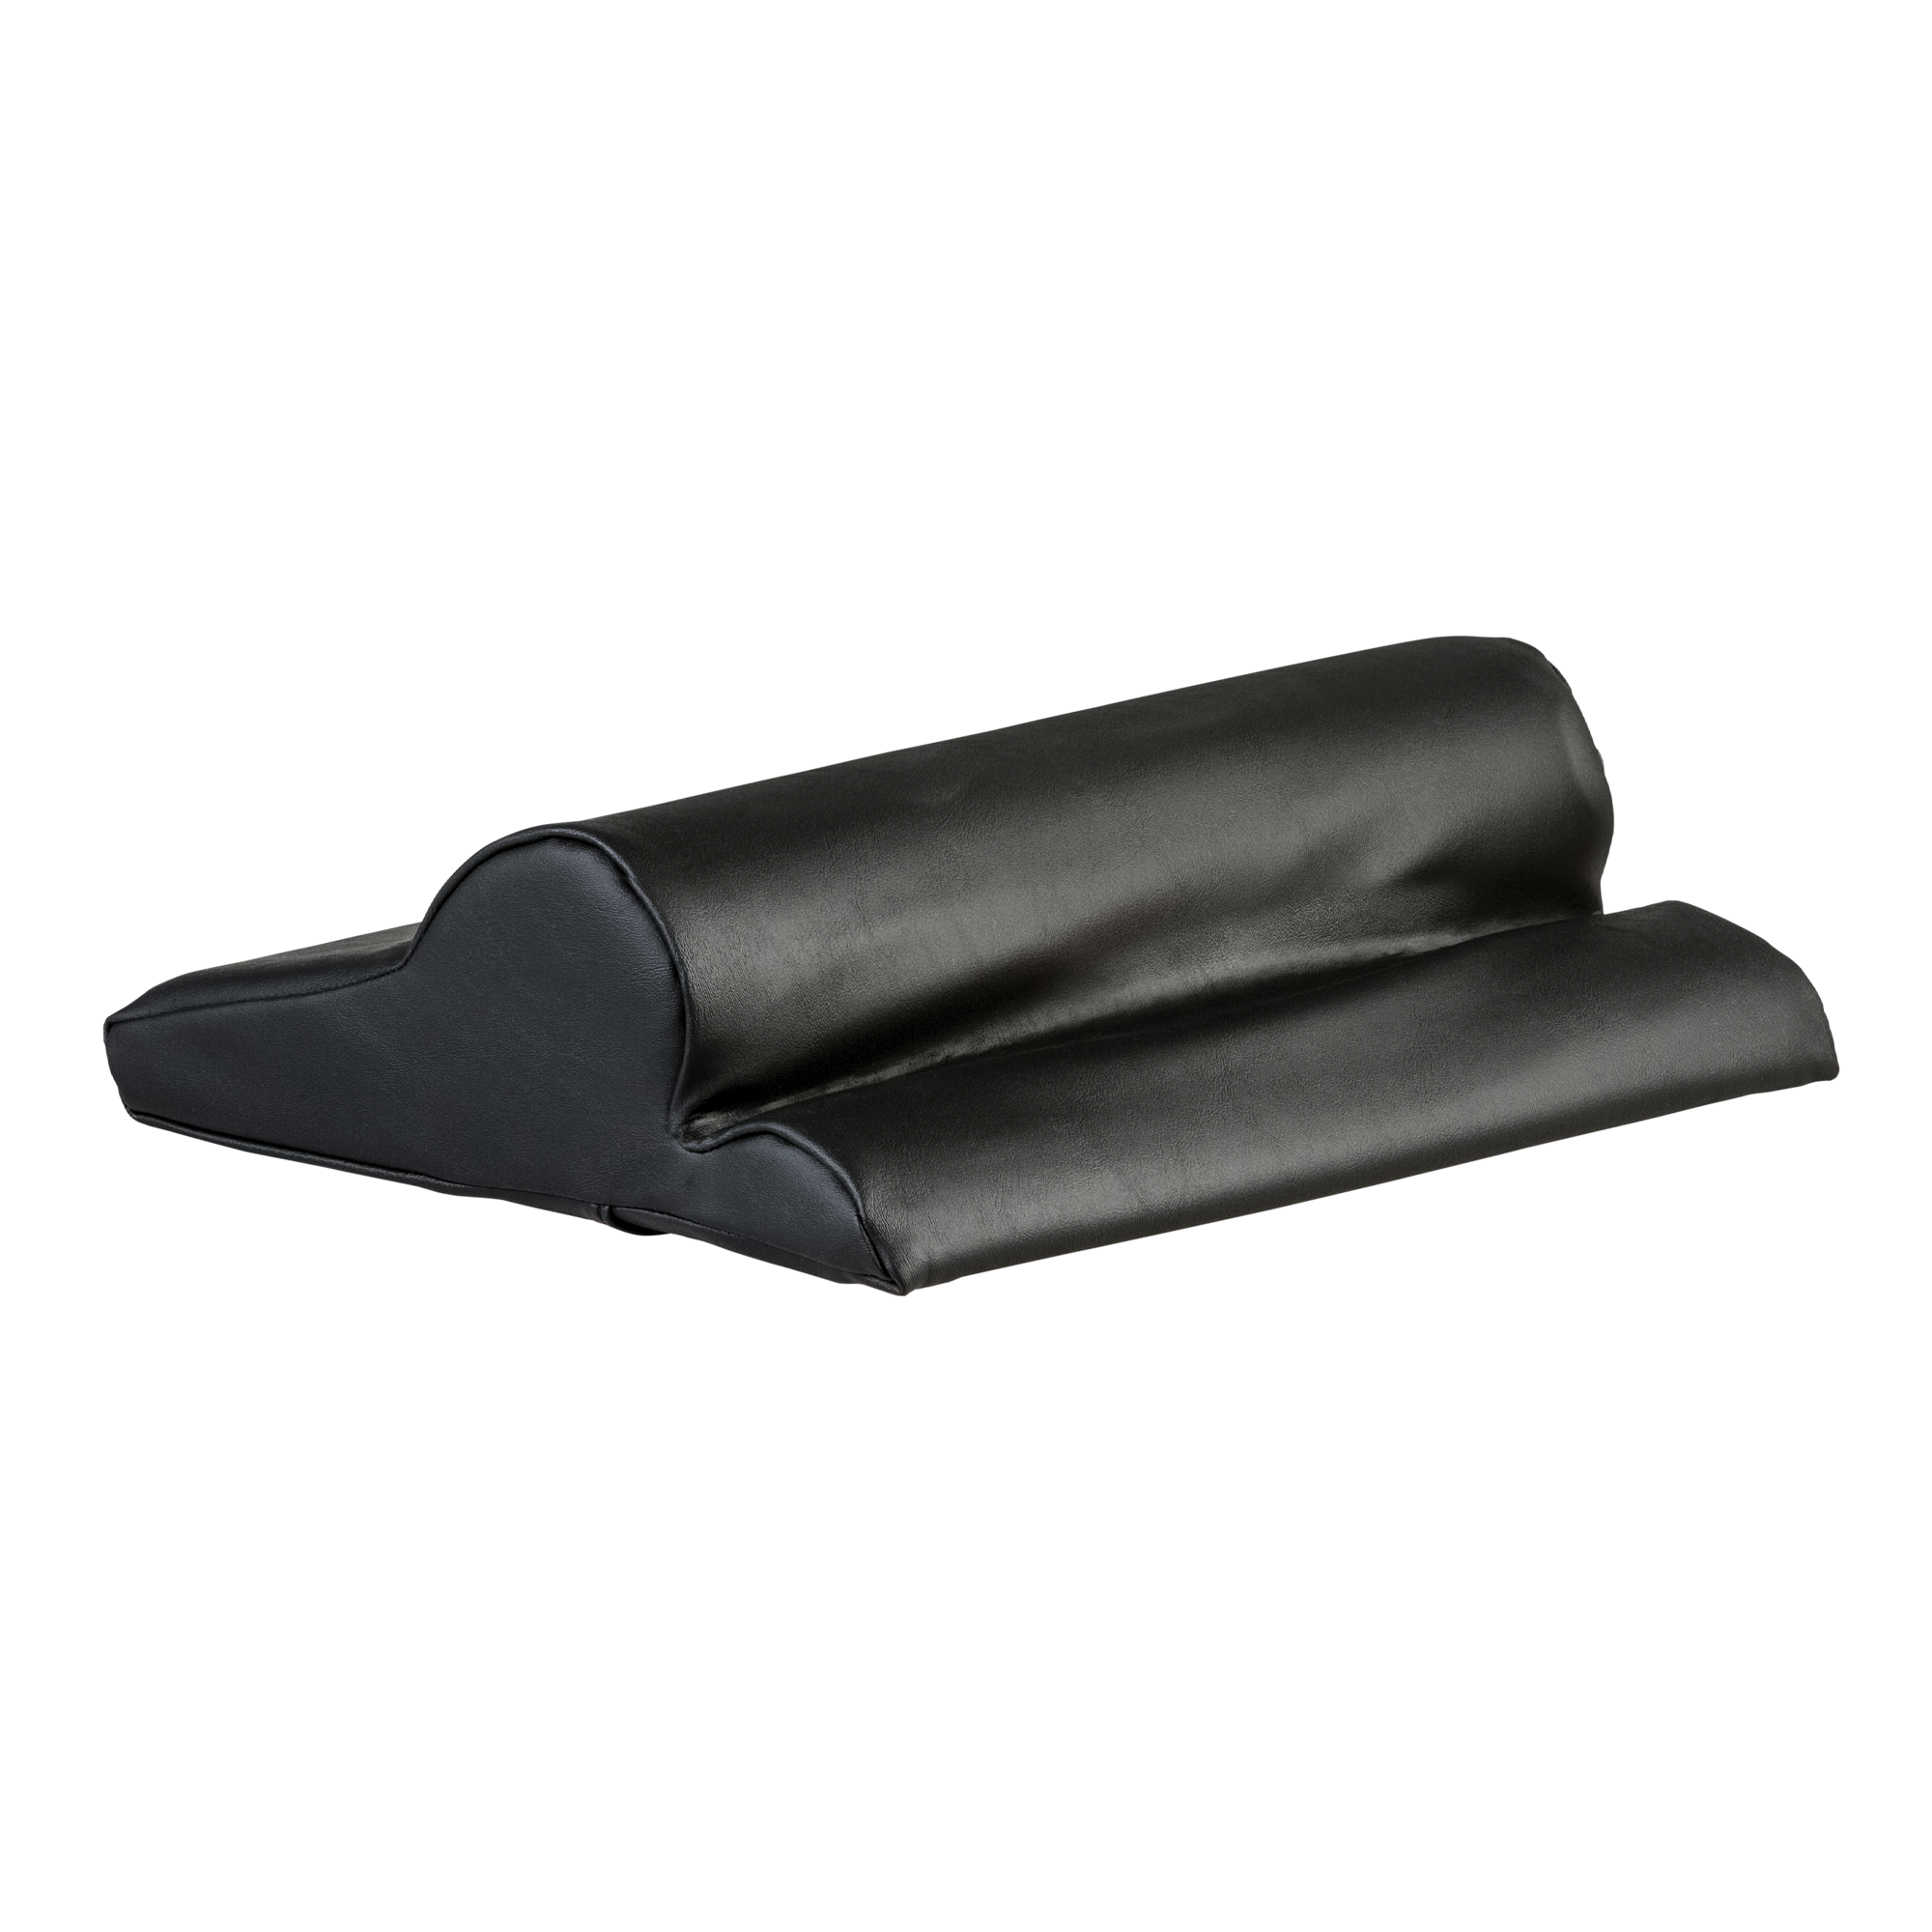 RB Traction Pillow Black